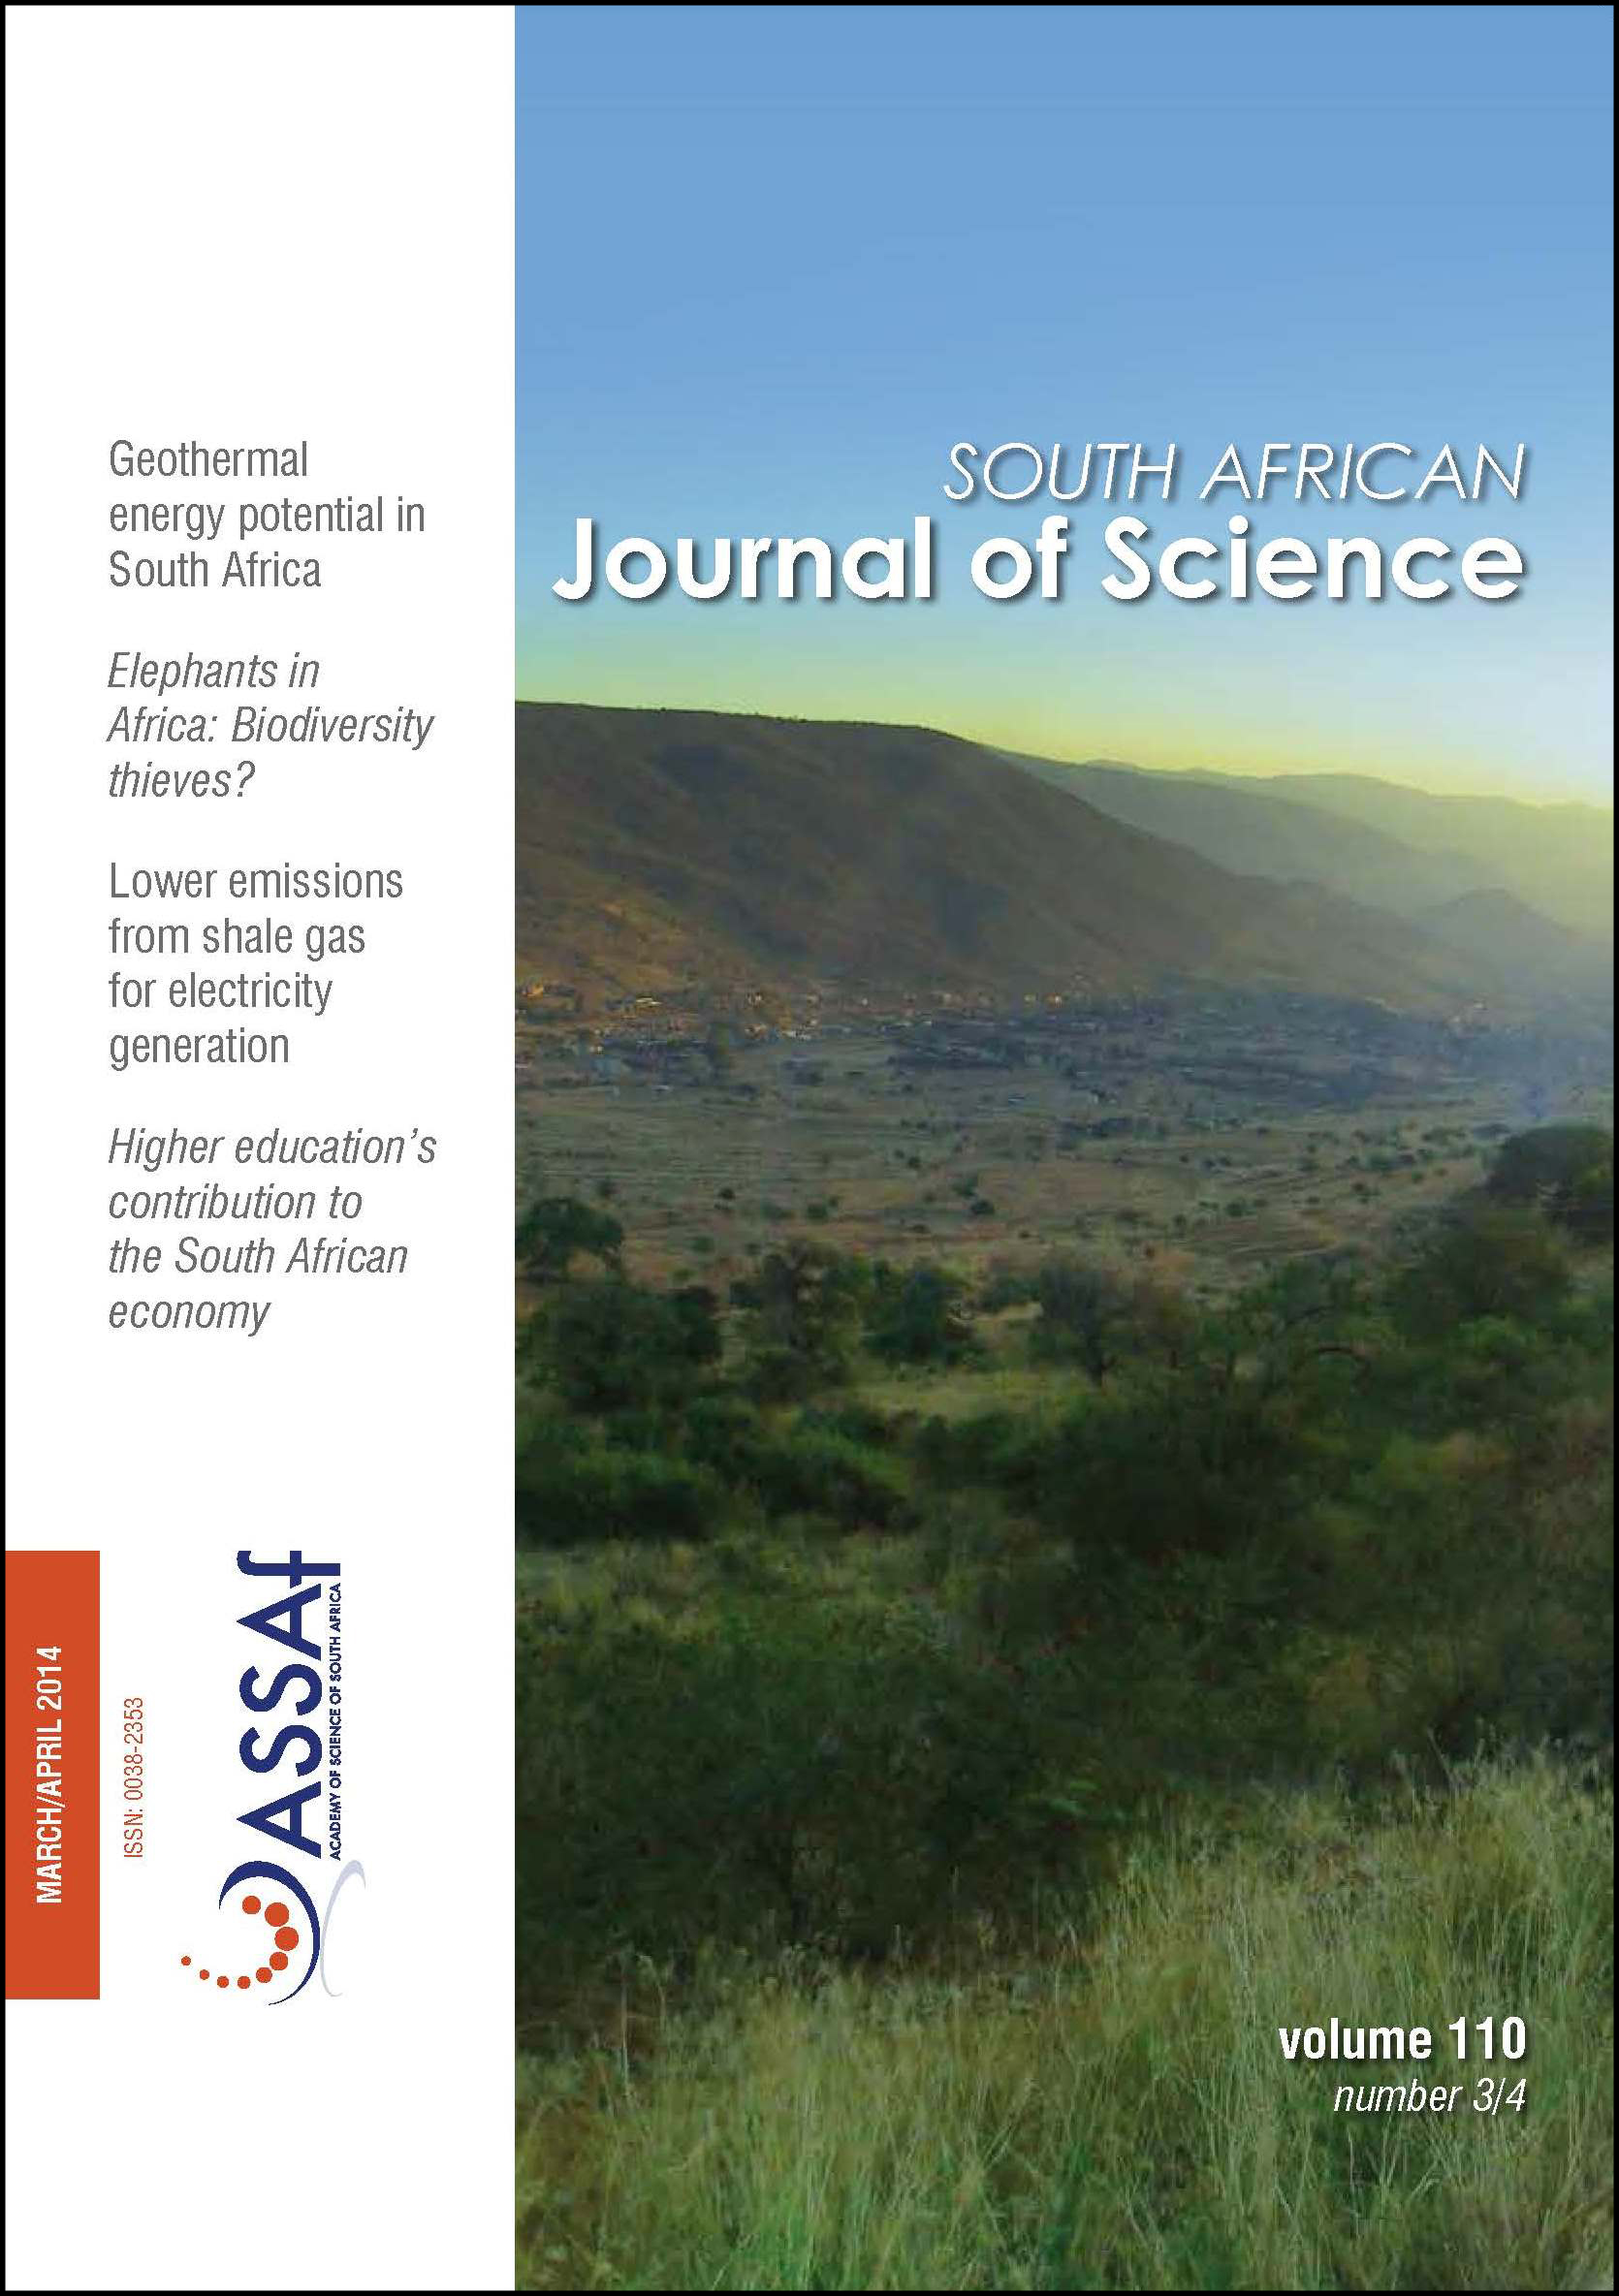 					View Vol. 110 No. 3/4 (2014): South African Journal of Science
				